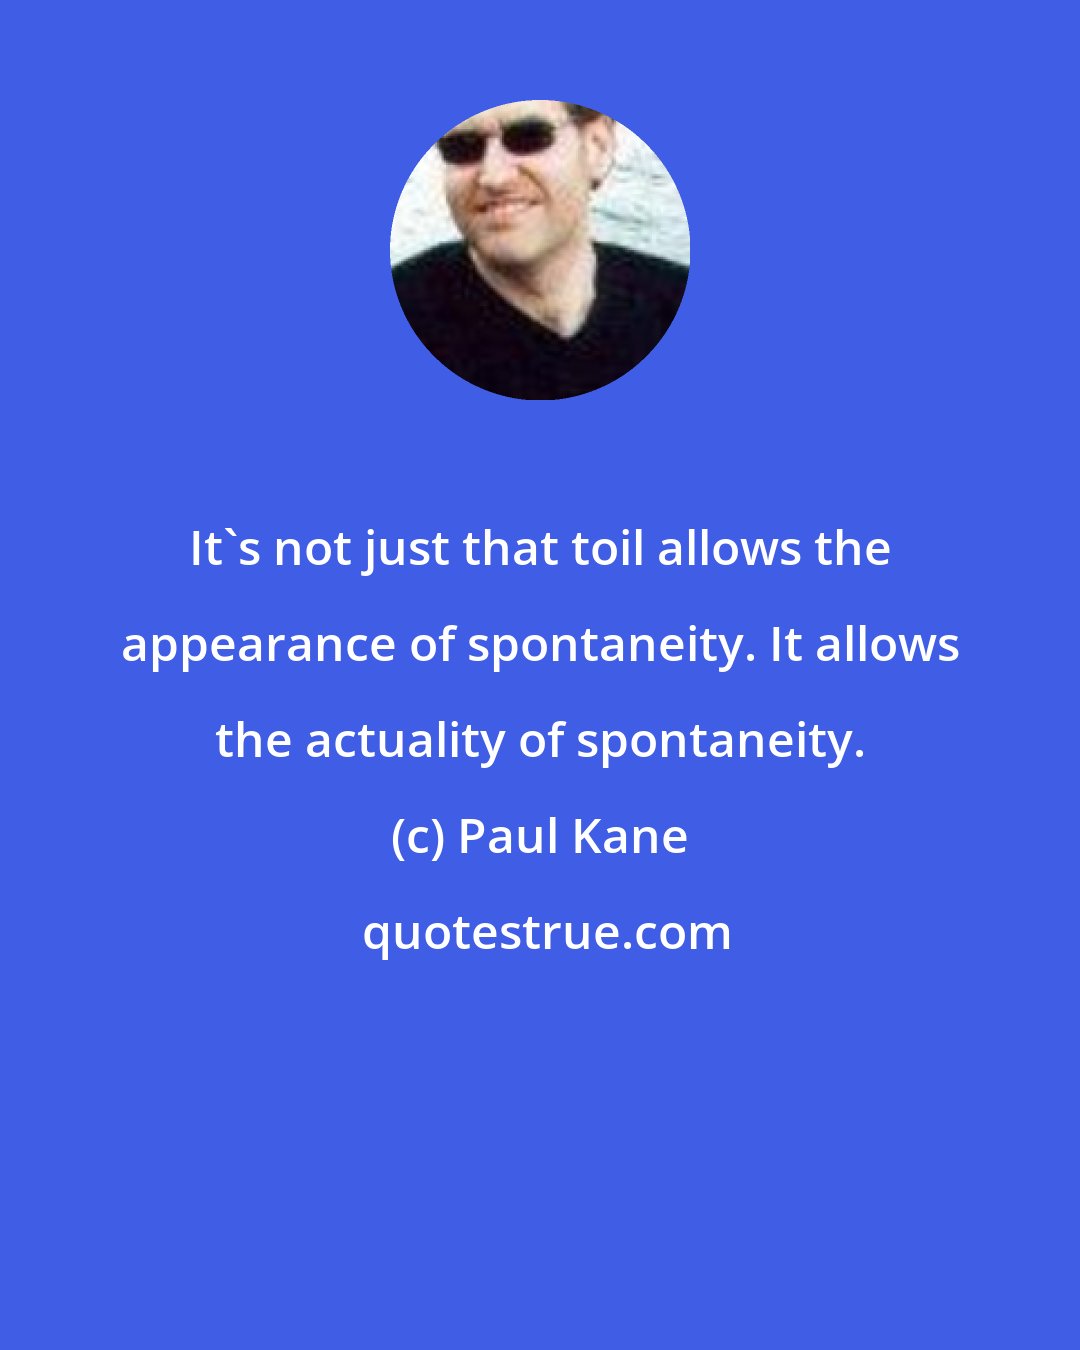 Paul Kane: It's not just that toil allows the appearance of spontaneity. It allows the actuality of spontaneity.